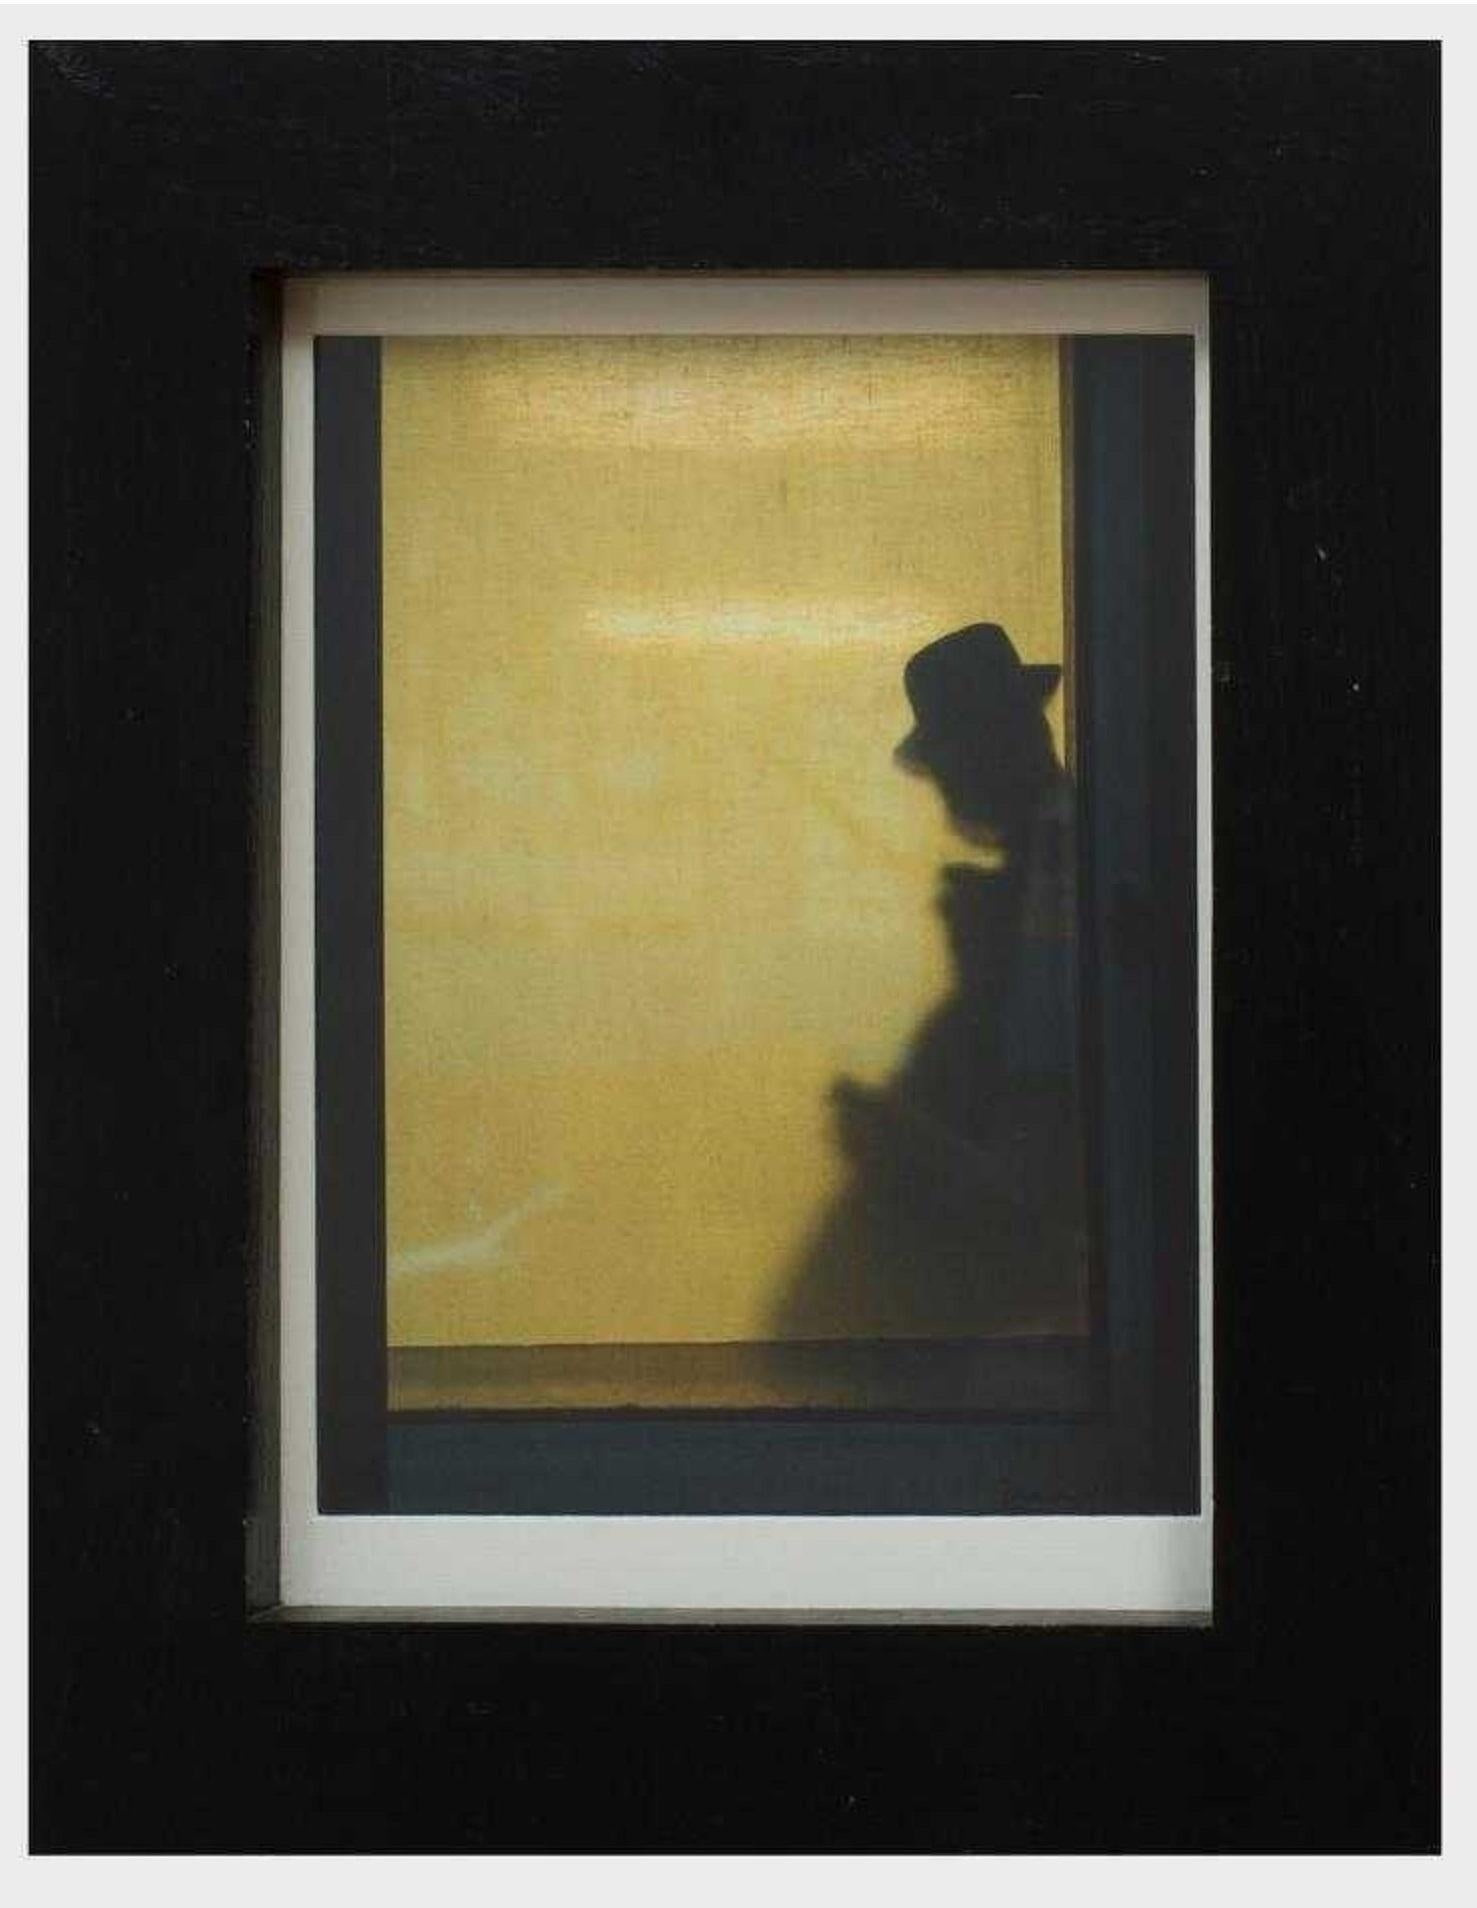 Color photograph, 2007, signed, dated and numbered 3 of 25 on the reverse.
14 x 11 in. (sheet), 20 1/7 x 16 1/2 in. (frame). It appears to be signed Laura Cohen or Laura Cohn
Taped to the overmat with clear tape at the reverse of the sheet corners.